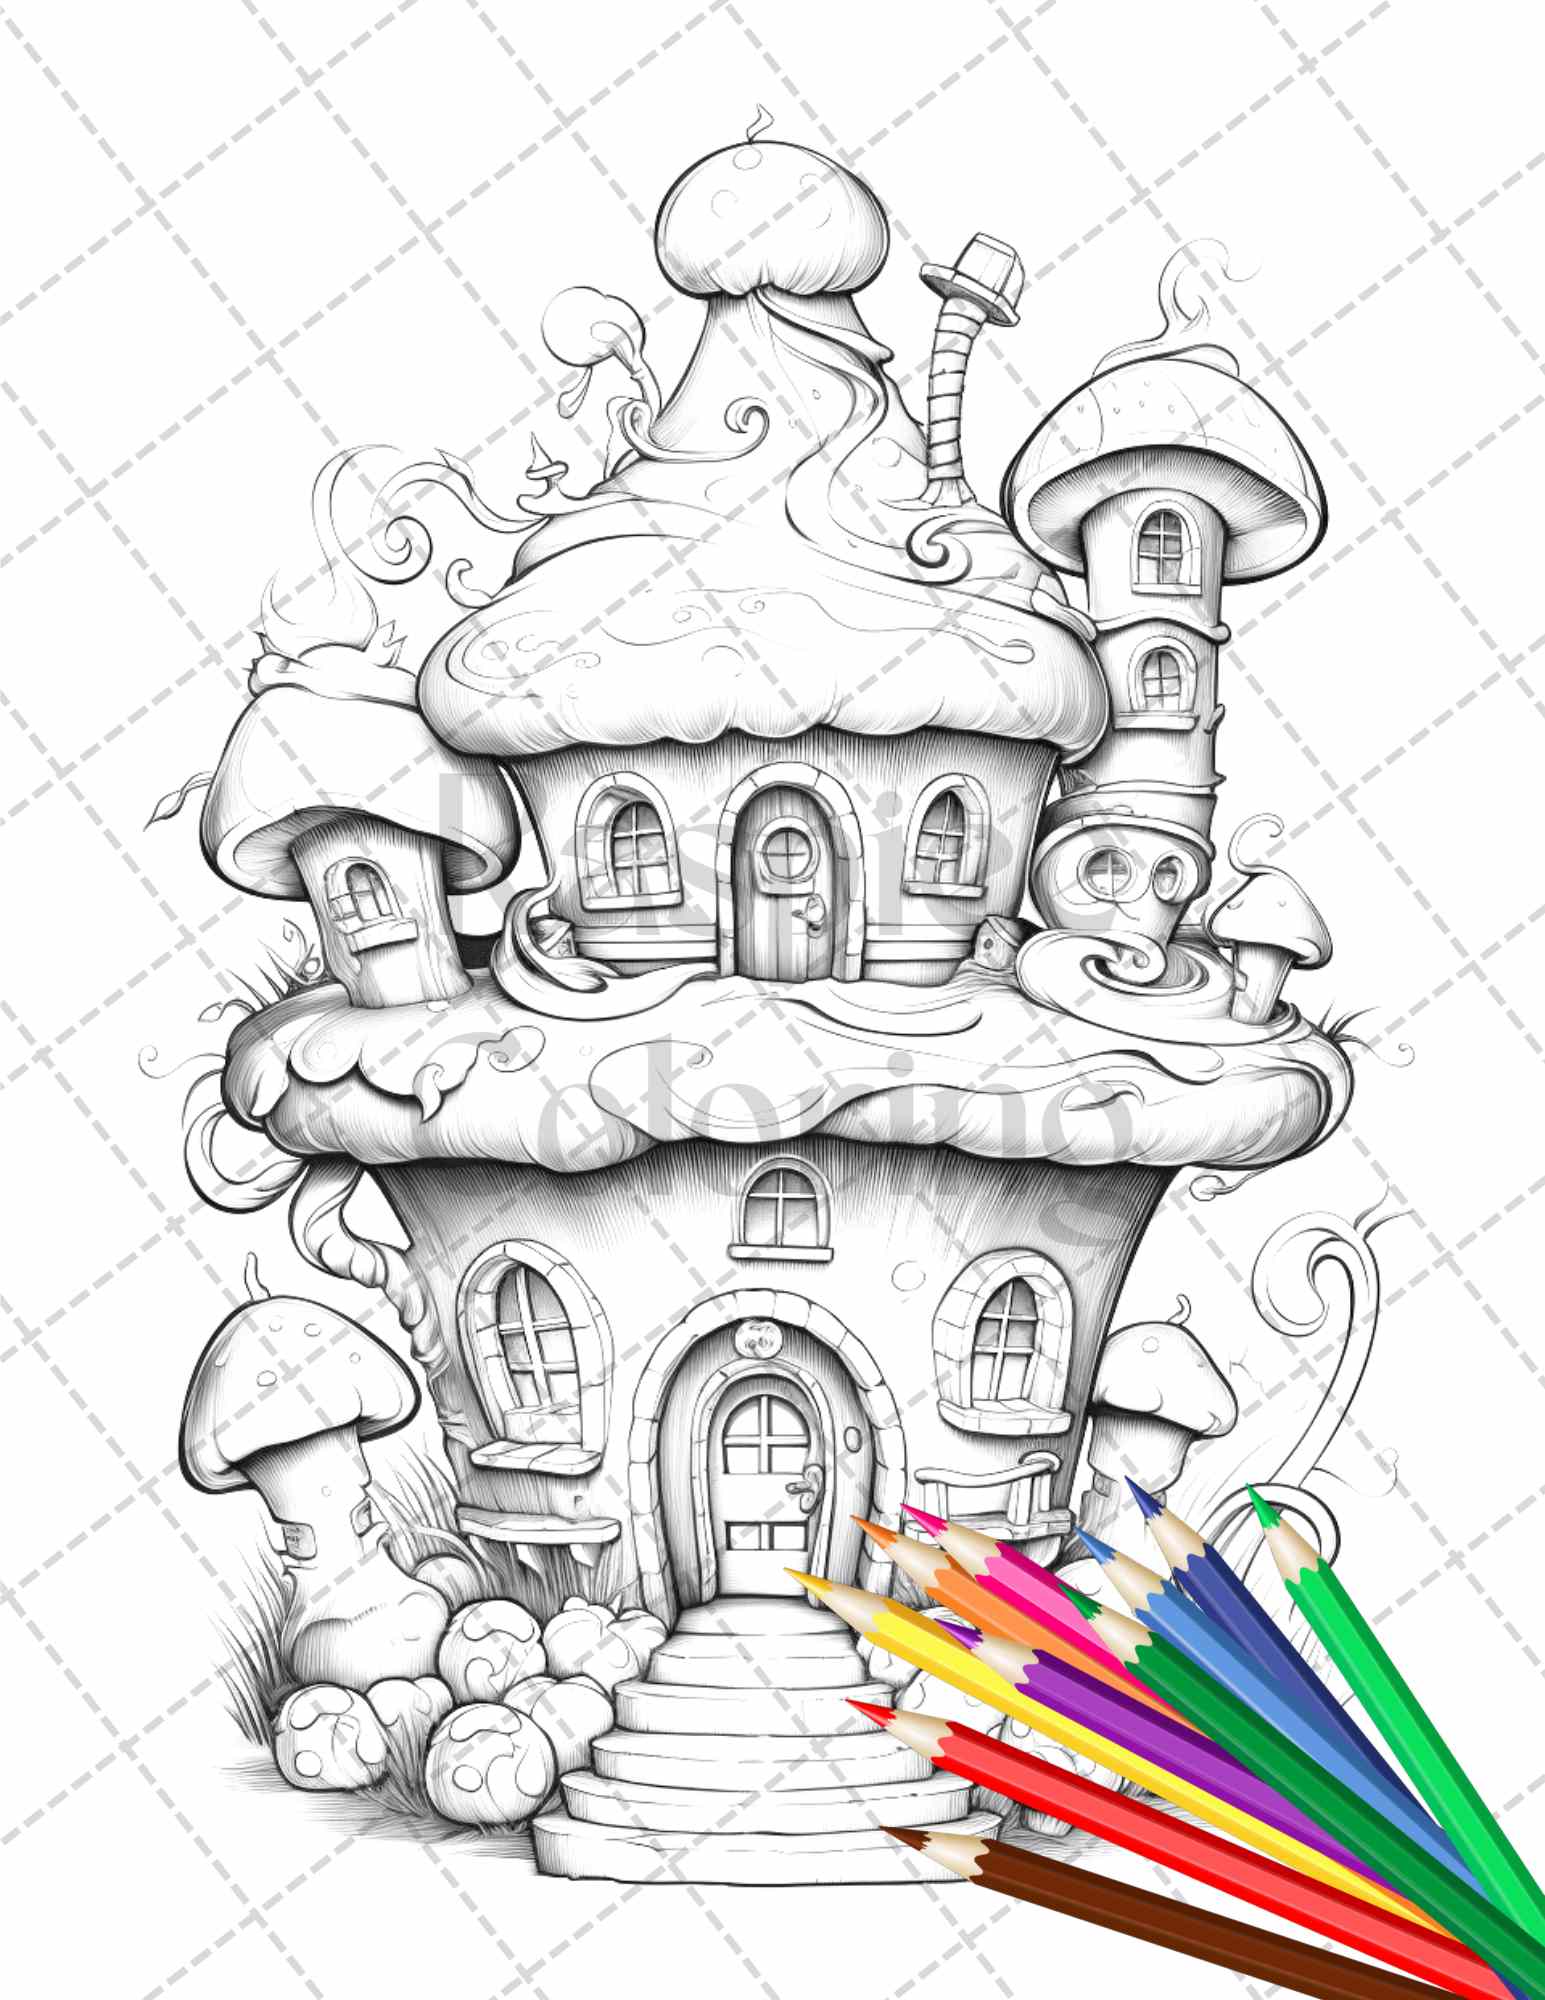 50 Adorable Cake Houses Grayscale Coloring Pages Printable for Adults and Kids, PDF File Instant Download - raspiee